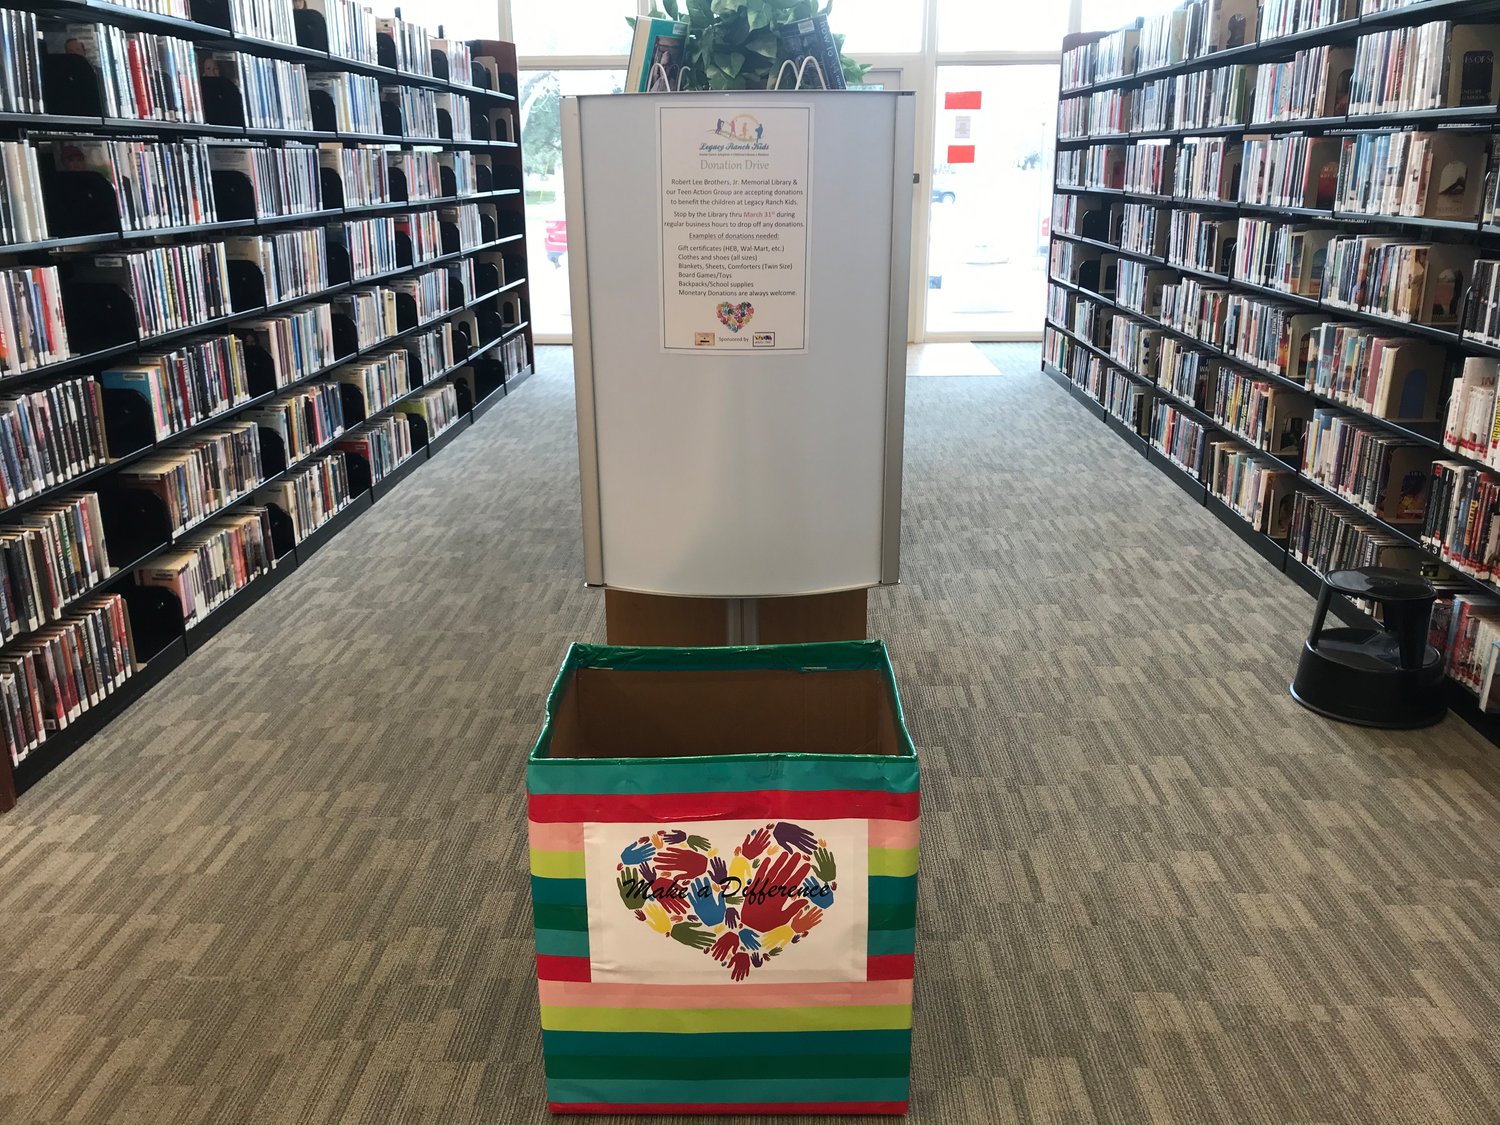 The Gonzales Public Library Teen Action Group is seeking donations for kids in need. Look for the donation box near the front entrance of the Robert Lee Brothers Jr. Memorial Library.